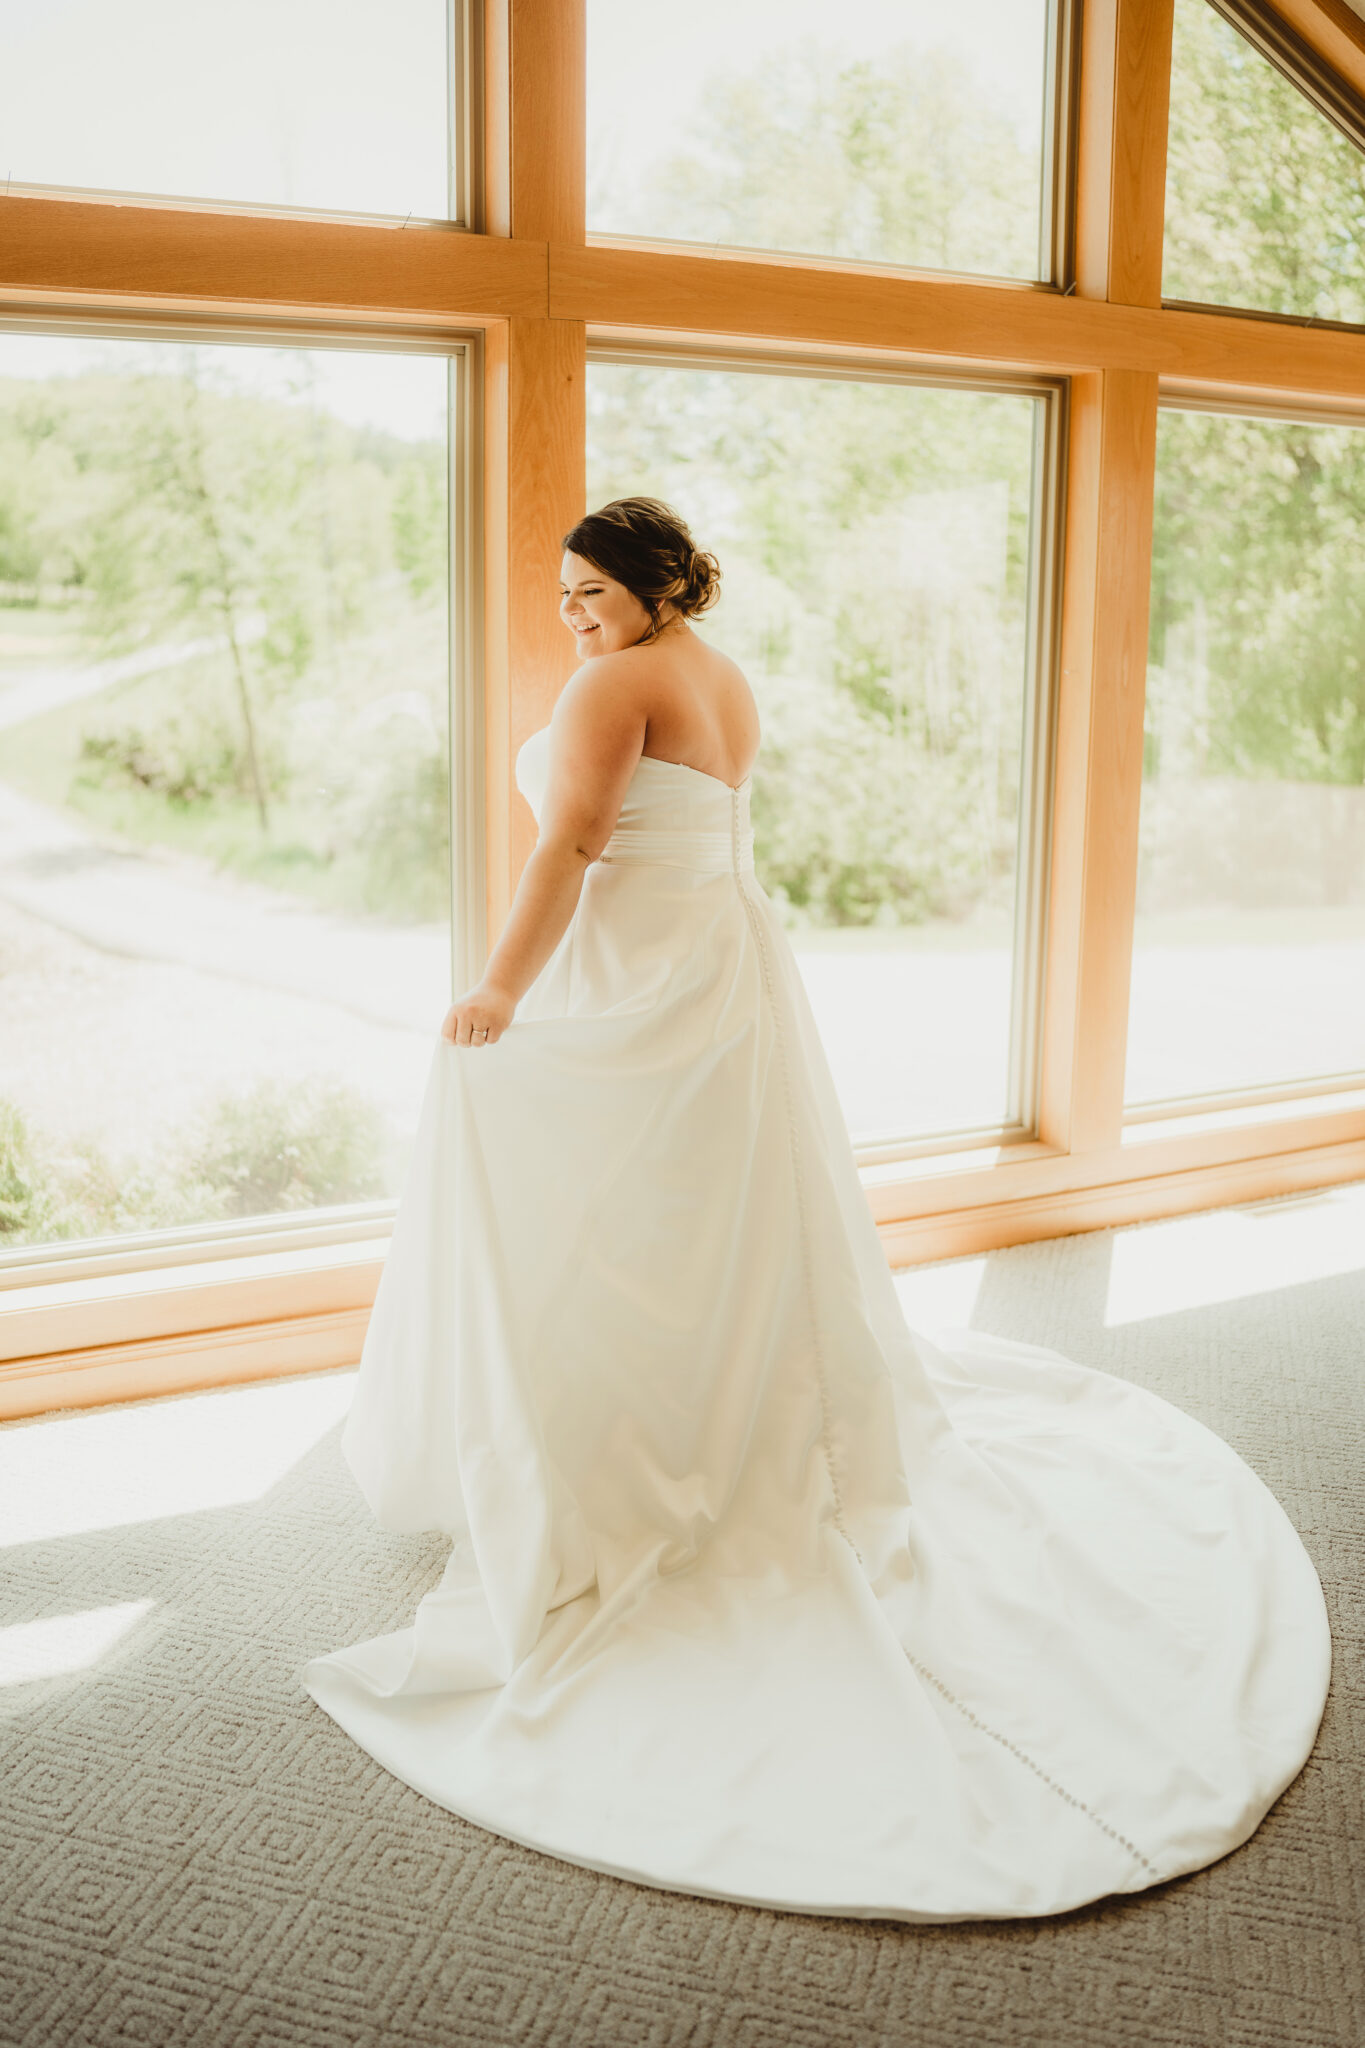 This stunning plus sized bride shows off her wedding dress in front of large venue windows. Natural light Wisconsin bride Sleeveless wedding gown #dixonappleorchard #orchardweddingvenue #outdoorwedding #appleorchardwedding #wisconsinweddingvenue